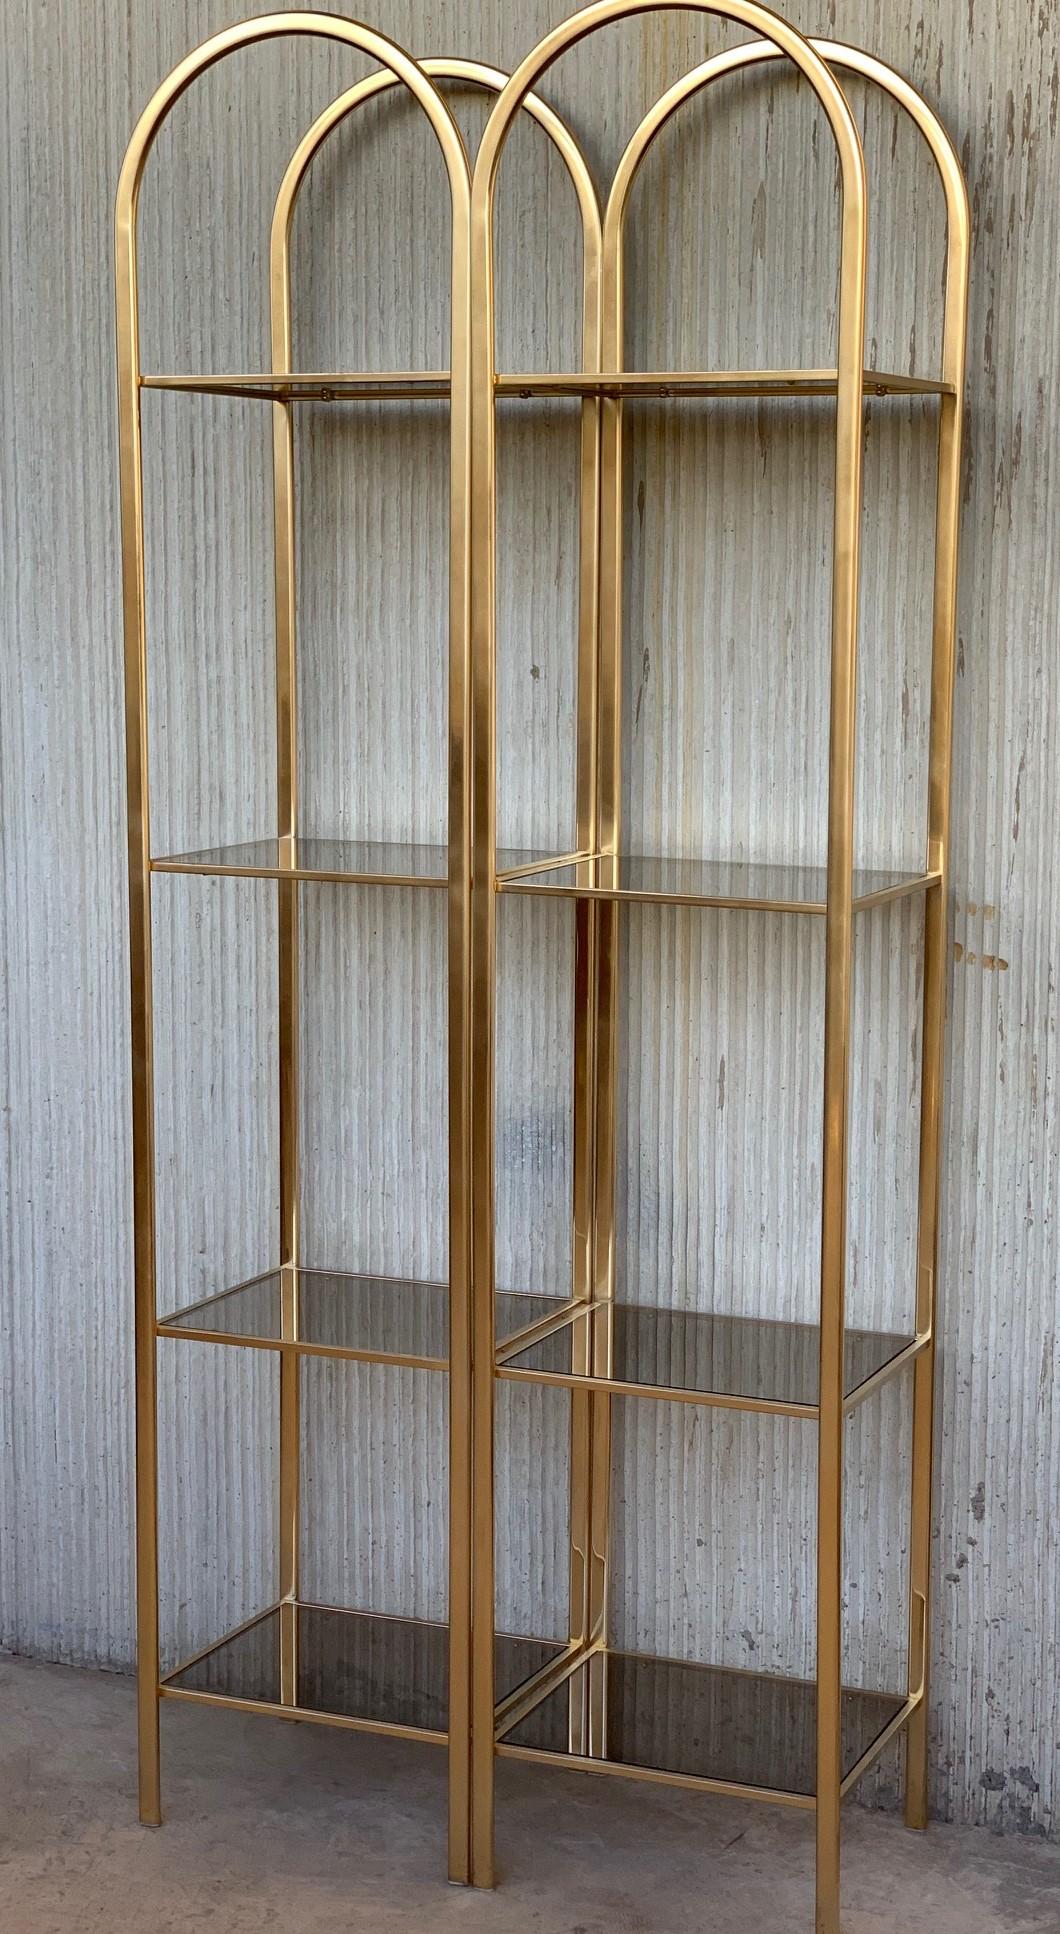 Midcentury pair of brass shelves o étagères with smoked glass
You can remove one metal joint and it disassembled in two shelves.

The piece has a mark on one shelve but is innapreciate.